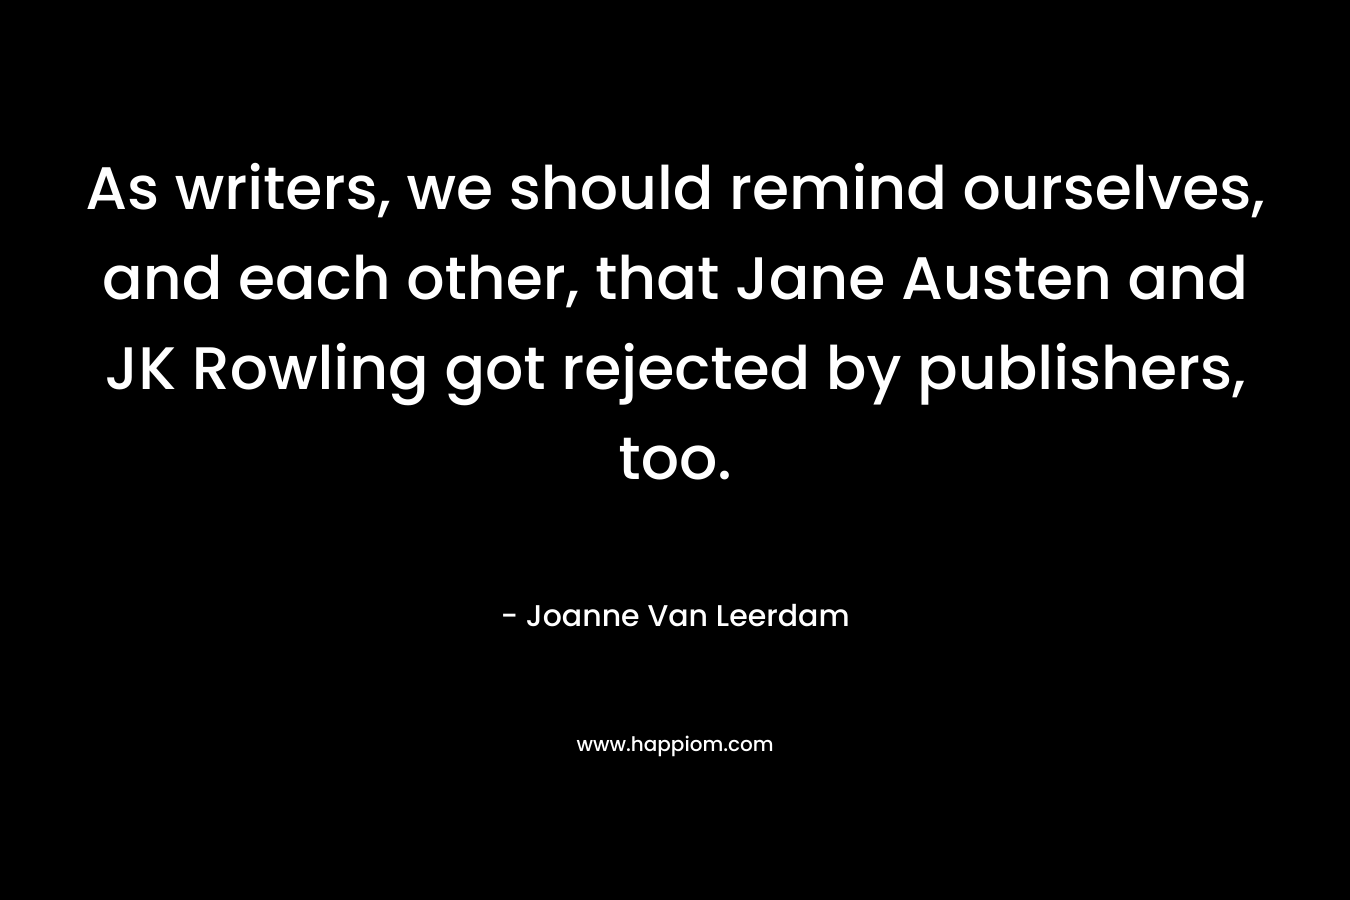 As writers, we should remind ourselves, and each other, that Jane Austen and JK Rowling got rejected by publishers, too. – Joanne Van Leerdam